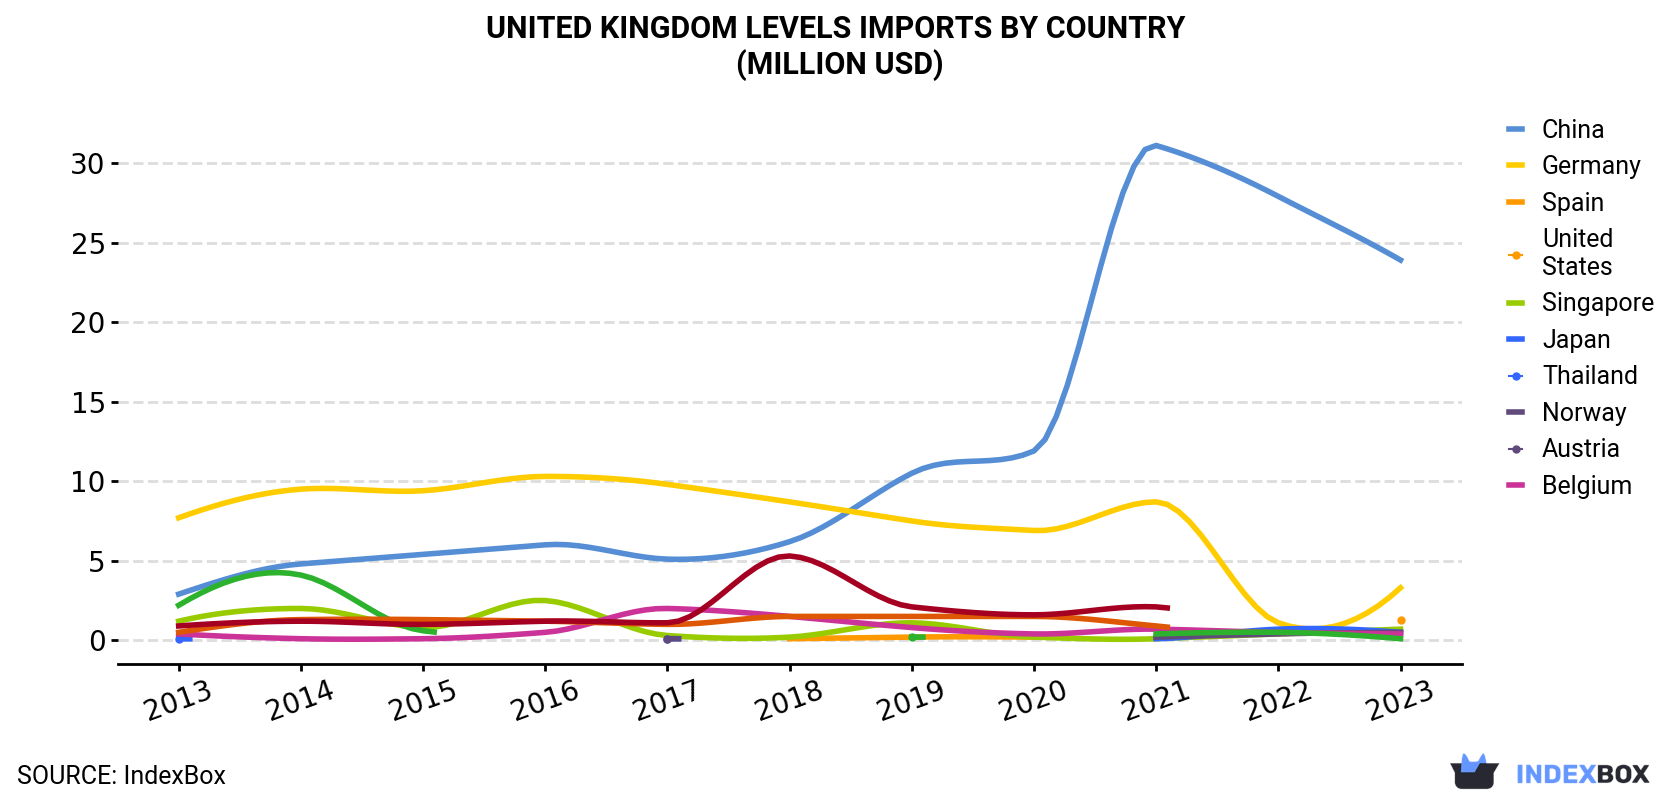 United Kingdom Levels Imports By Country (Million USD)